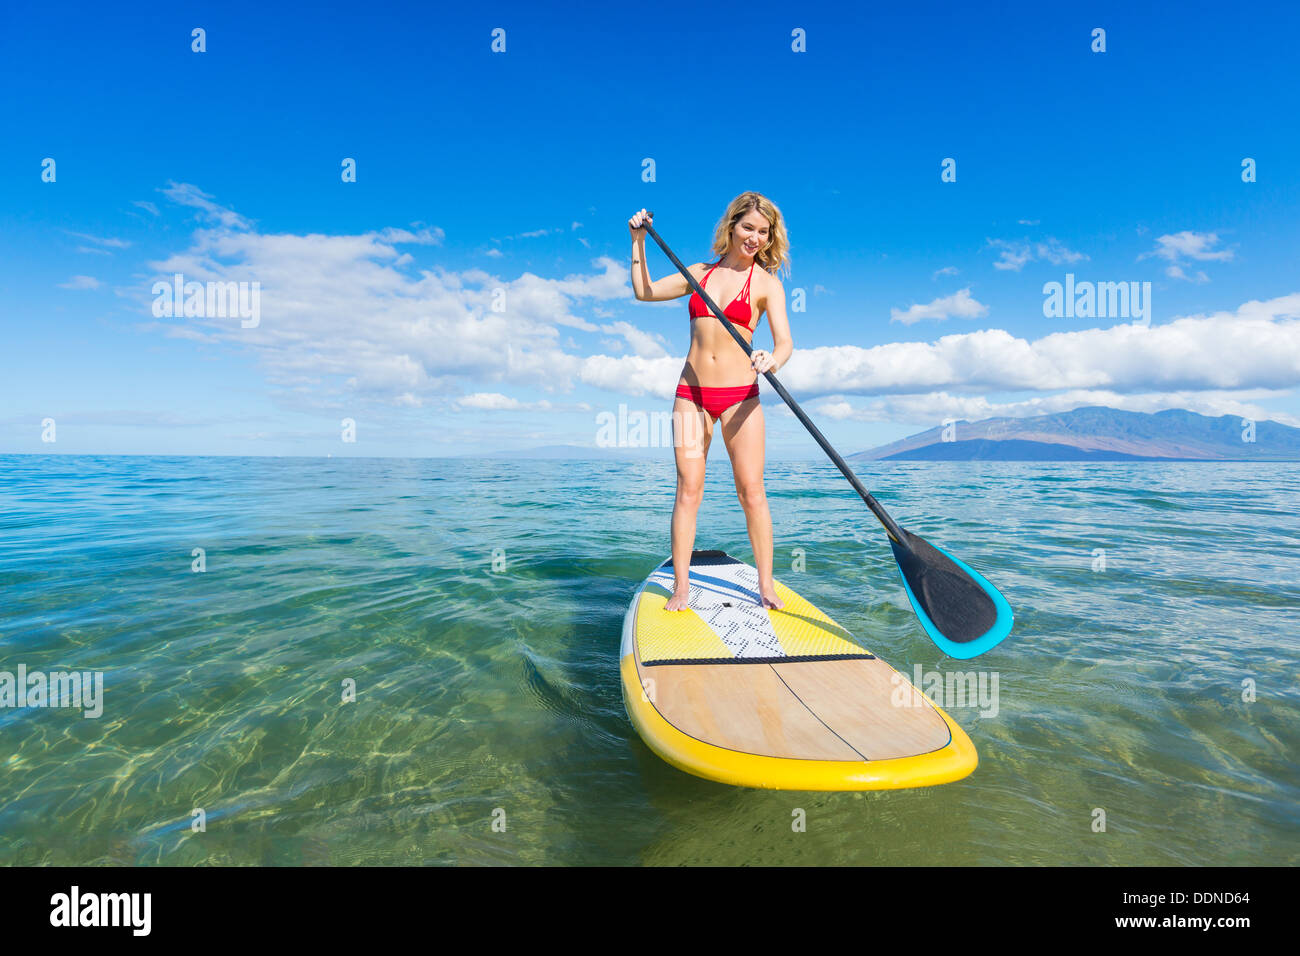 Attractive Woman on Stand Up Paddle Board, SUP, Hawaii, l'océan bleu tropical Banque D'Images